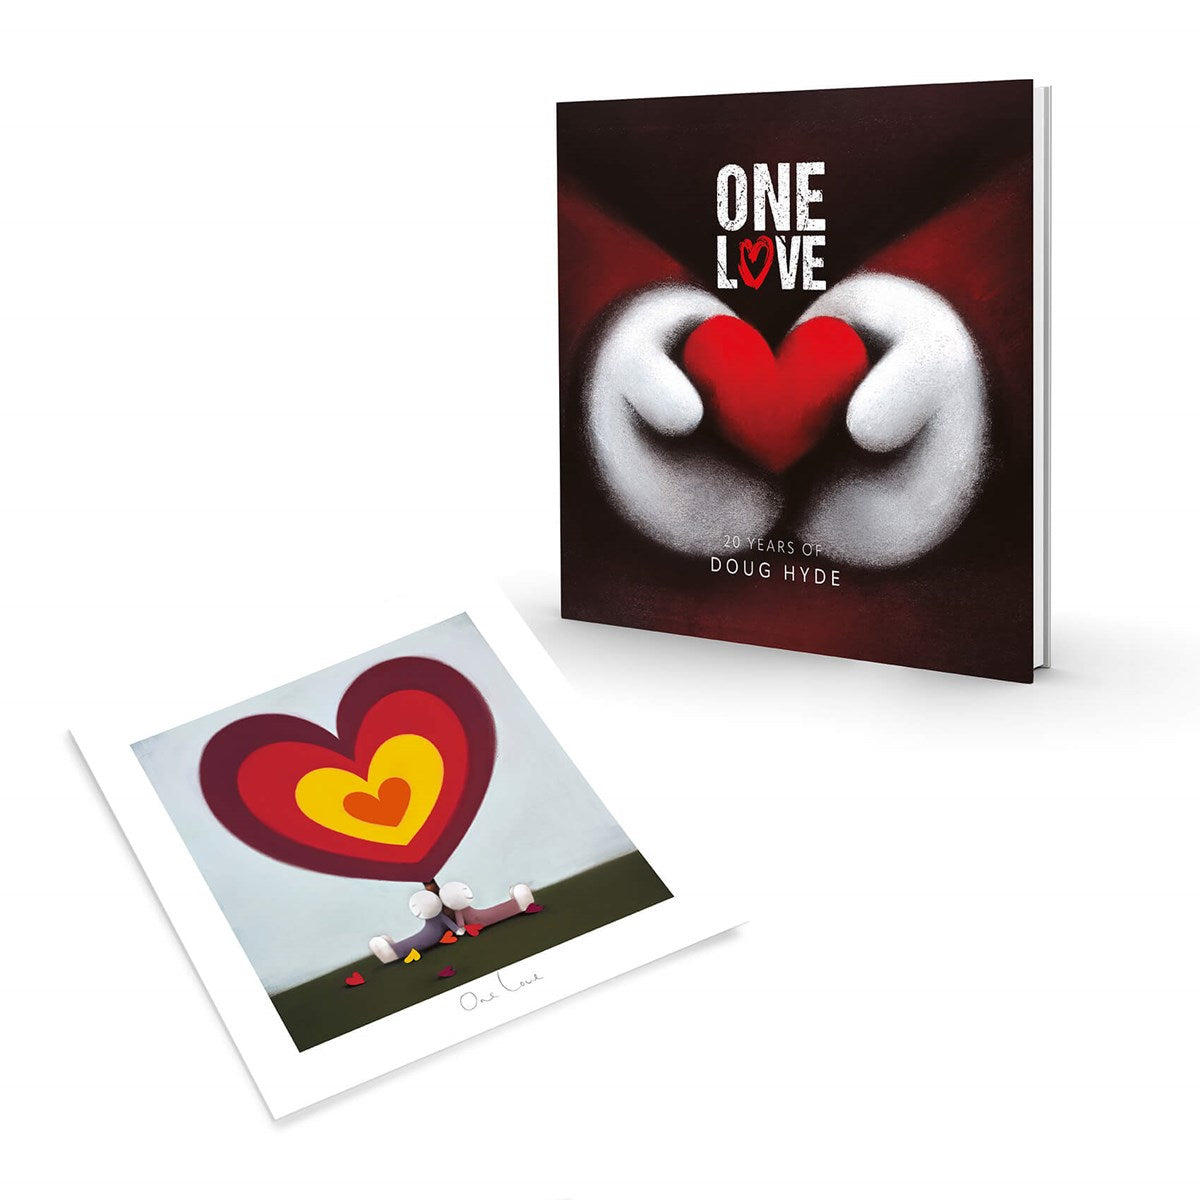 One Love (Book) Limited Edition Doug Hyde